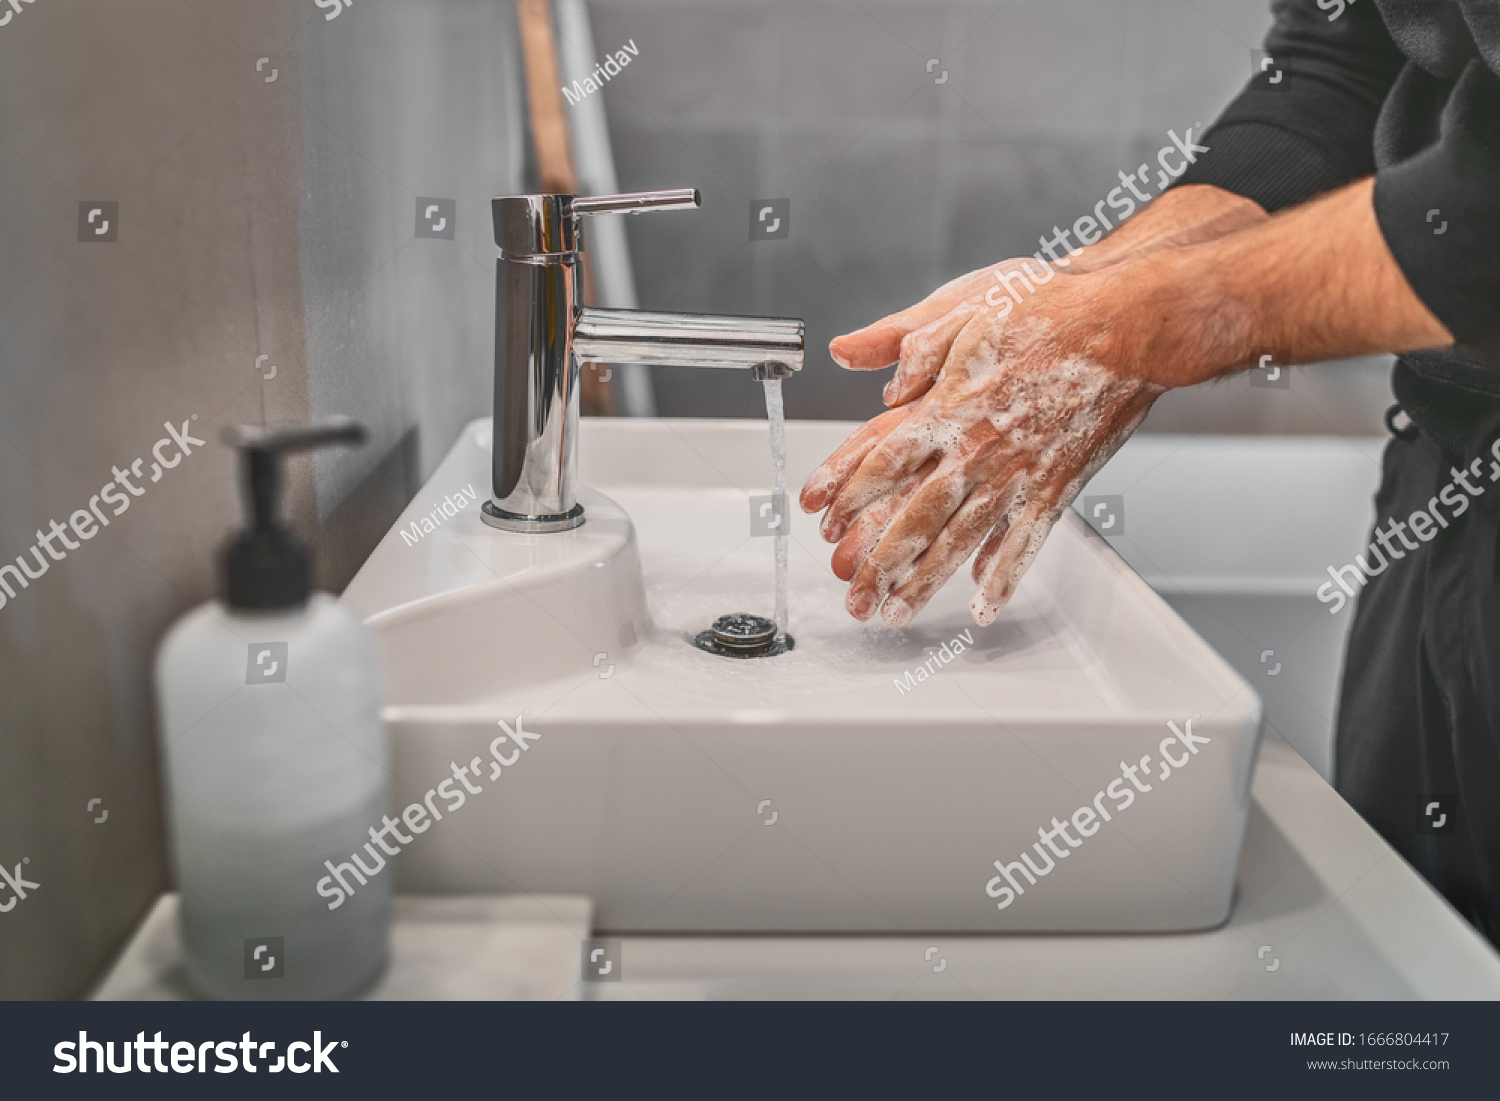 Washing hands with soap and hot water at home bathroom sink man cleansing hand hygiene for coronavirus outbreak prevention. Corona Virus pandemic protection by washing hands frequently. #1666804417